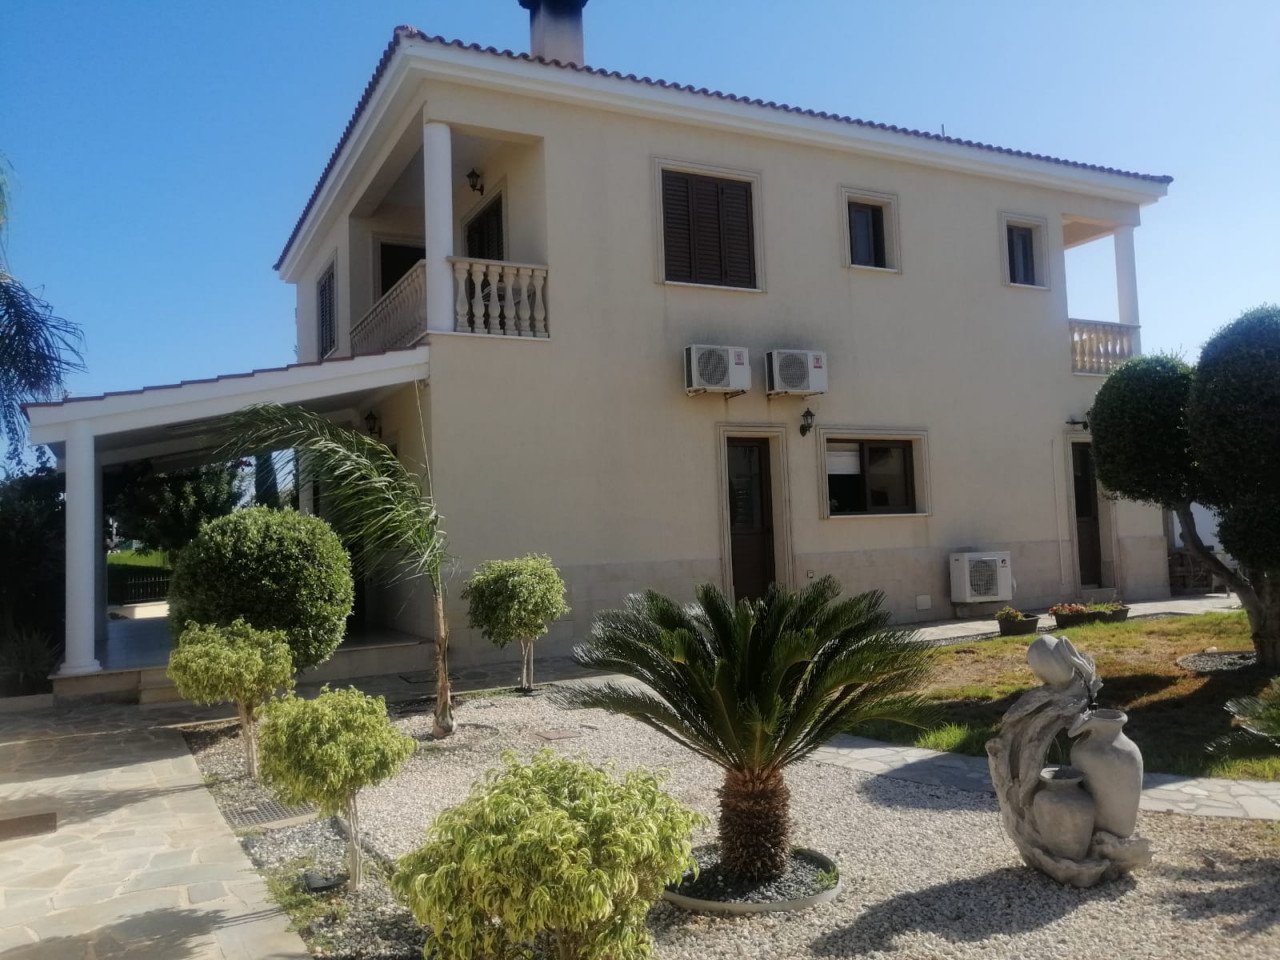 Property for Rent: House (Detached) in Koloni, Paphos for Rent | Key Realtor Cyprus